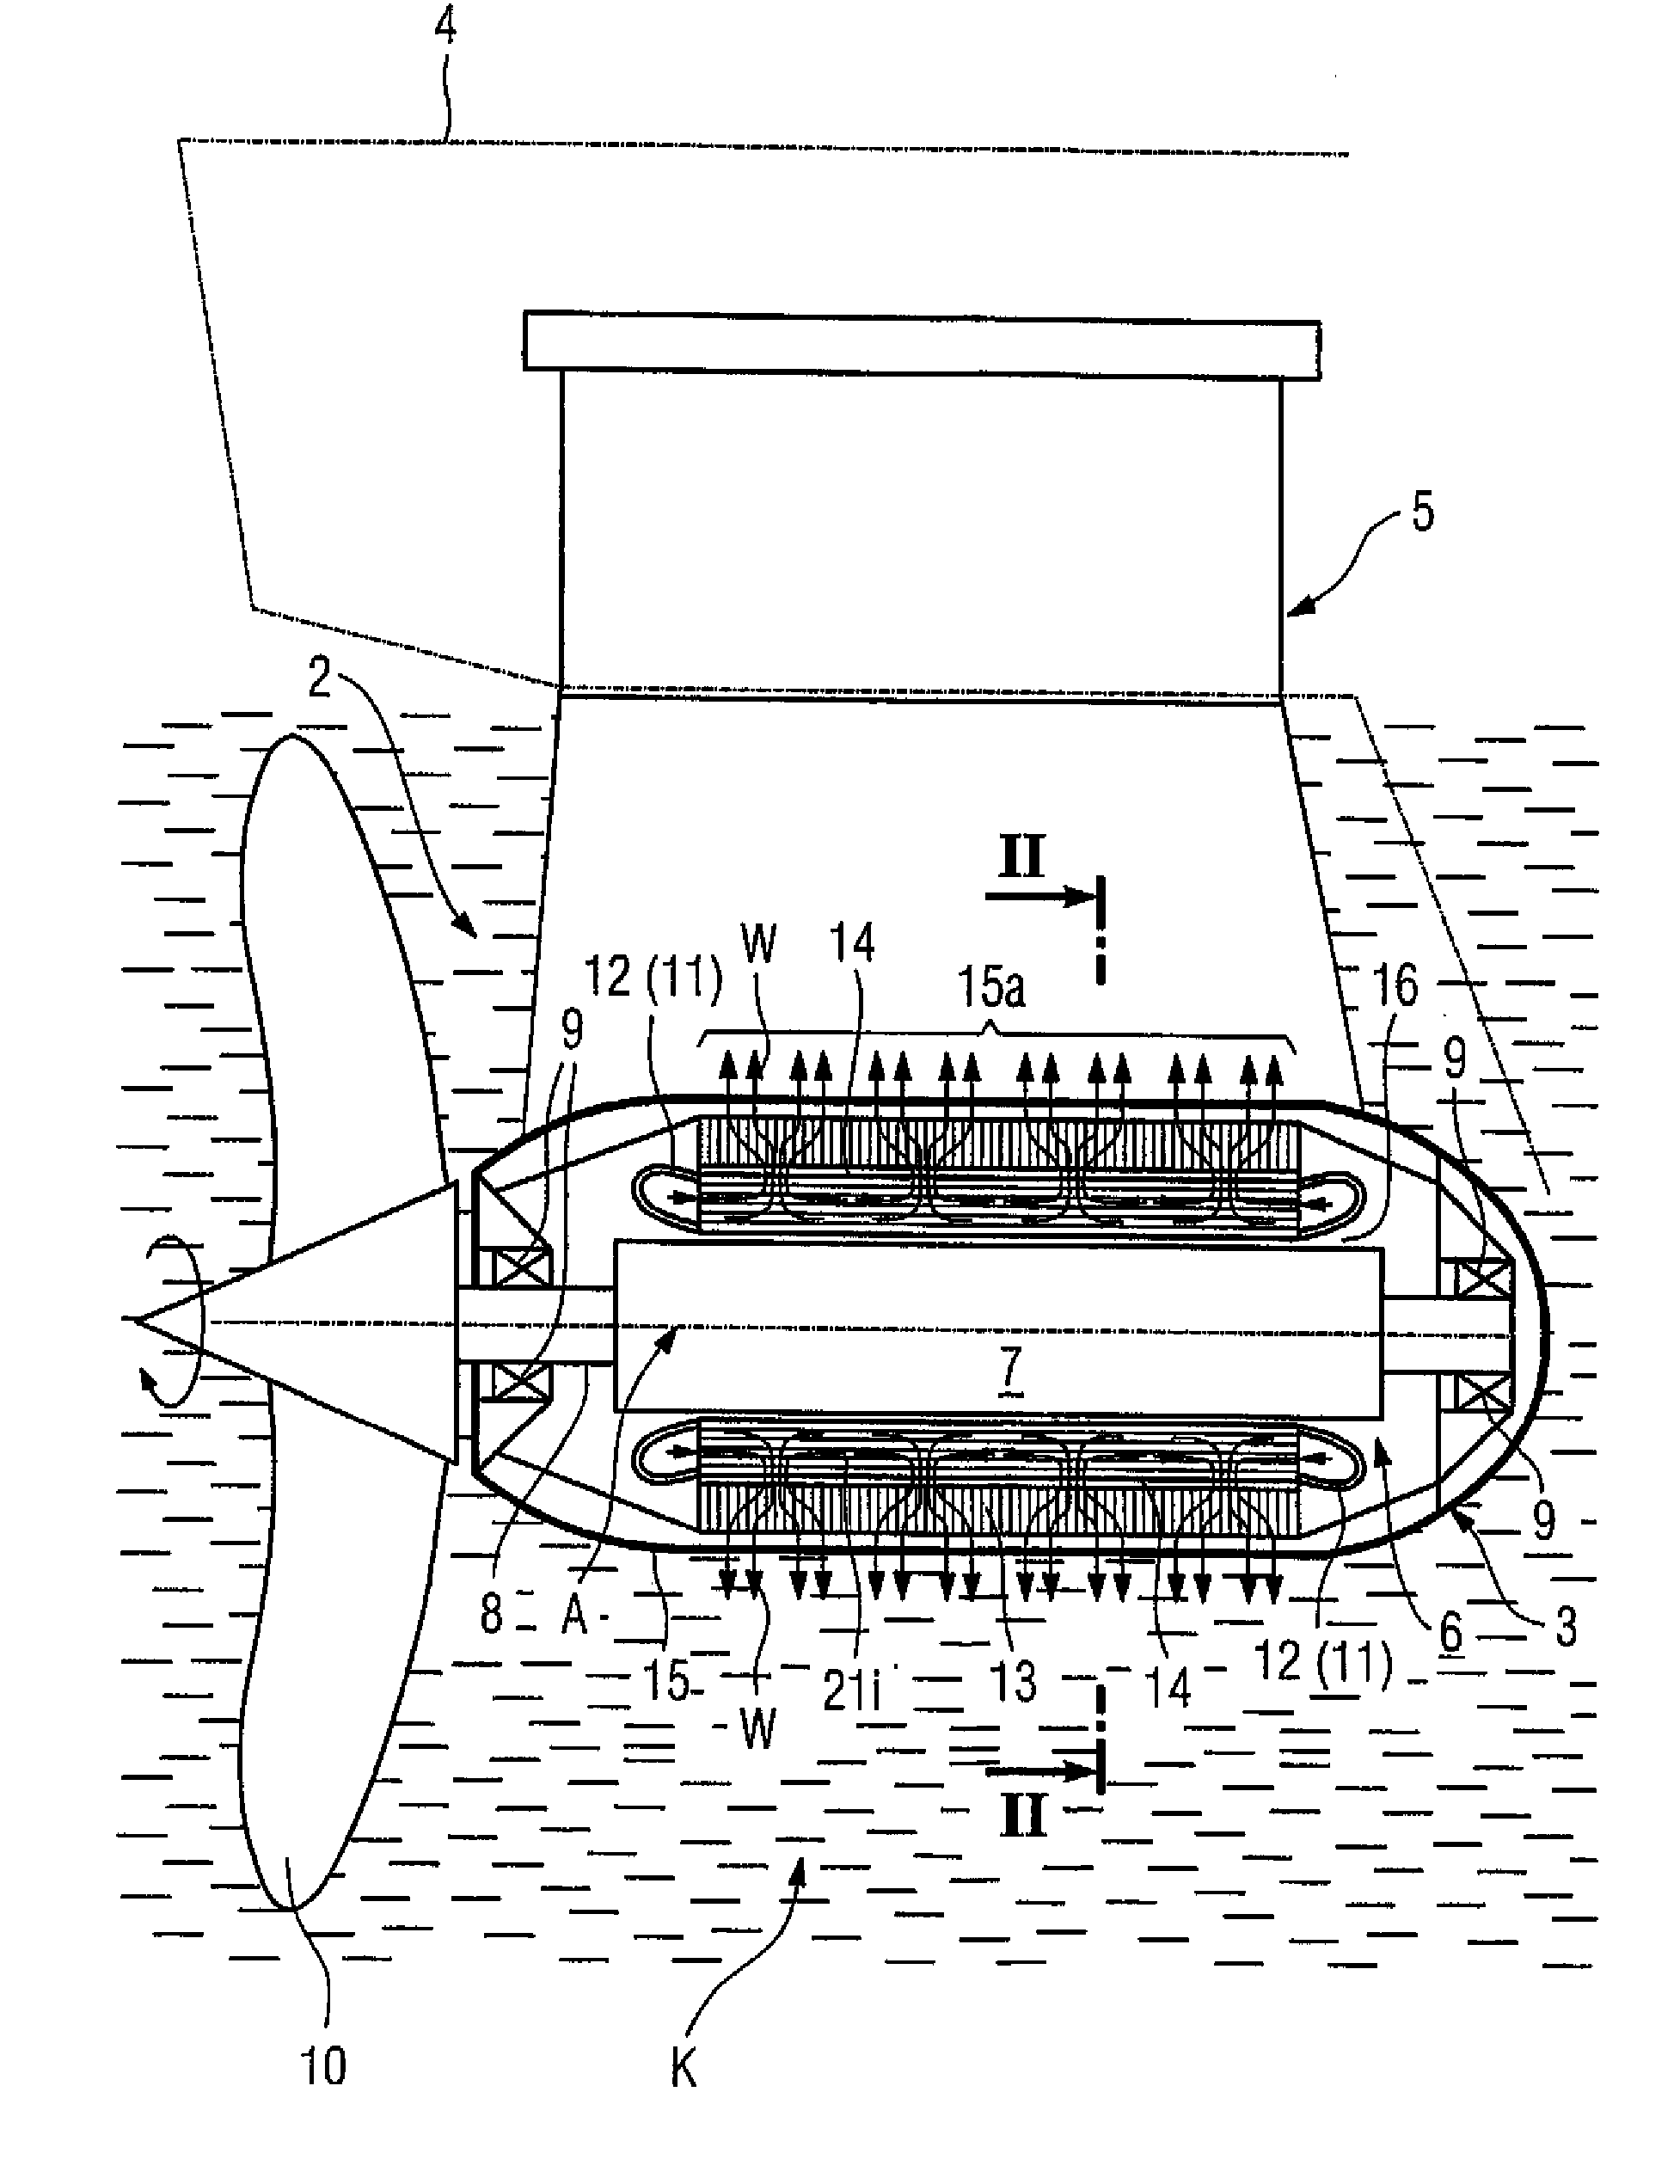 Ship propulsion system with cooling systems for the stator and rotor of the synchronous machine of the propulsion system